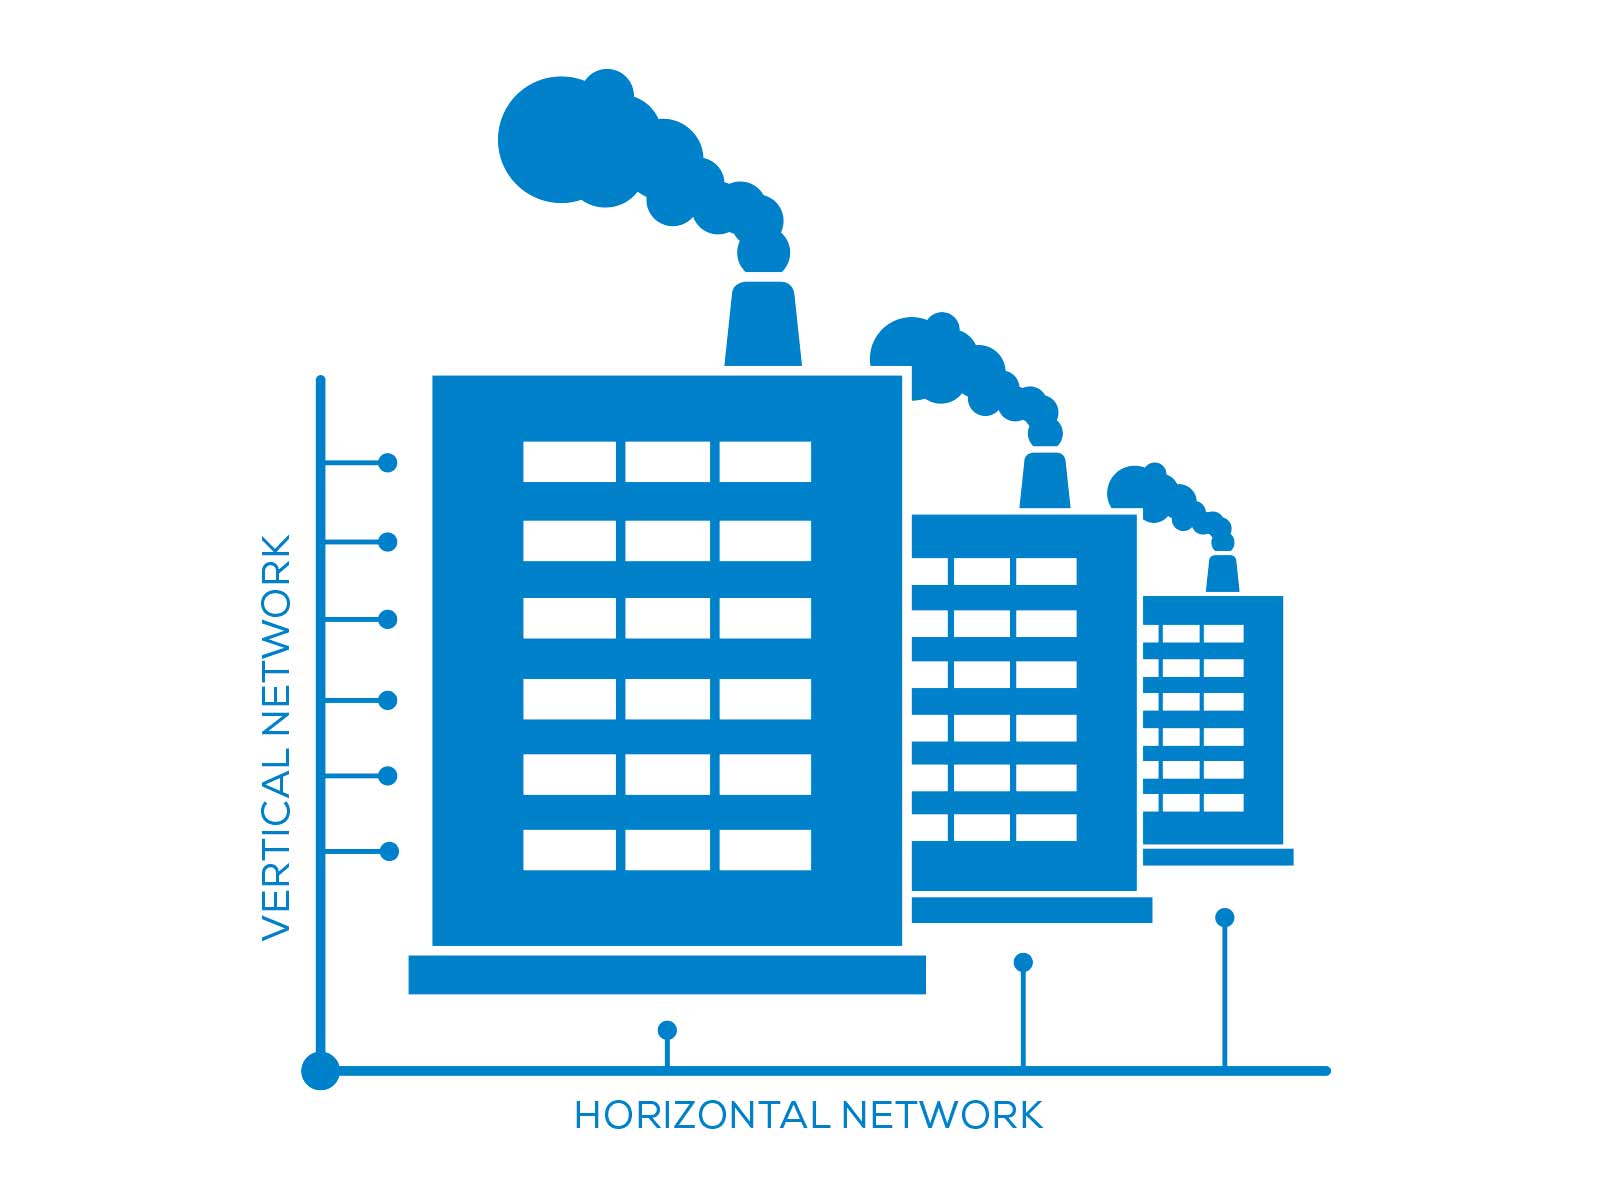 IoT-Connectivity: What is the difference between vertical and horizontal connectivity?